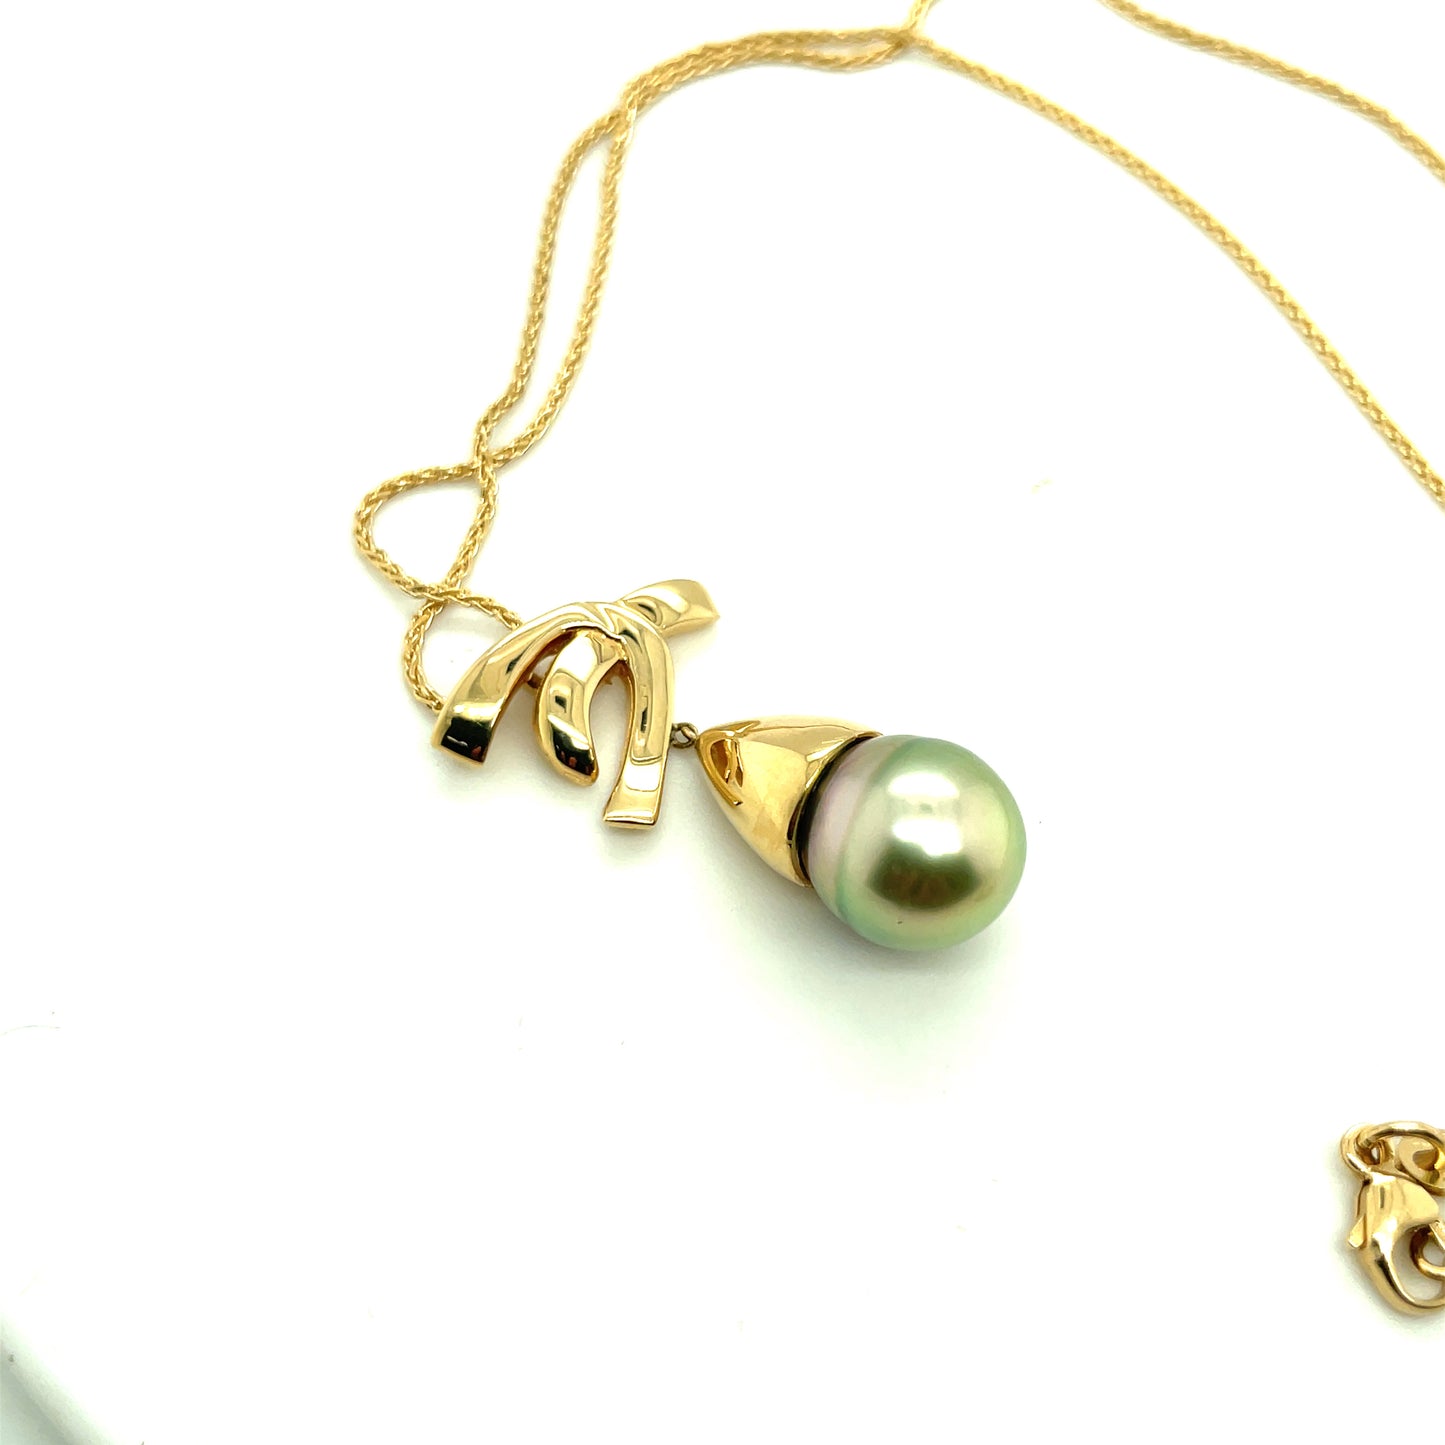 Vintage 18k Yellow Gold and Pearl Necklace 11.6 grams